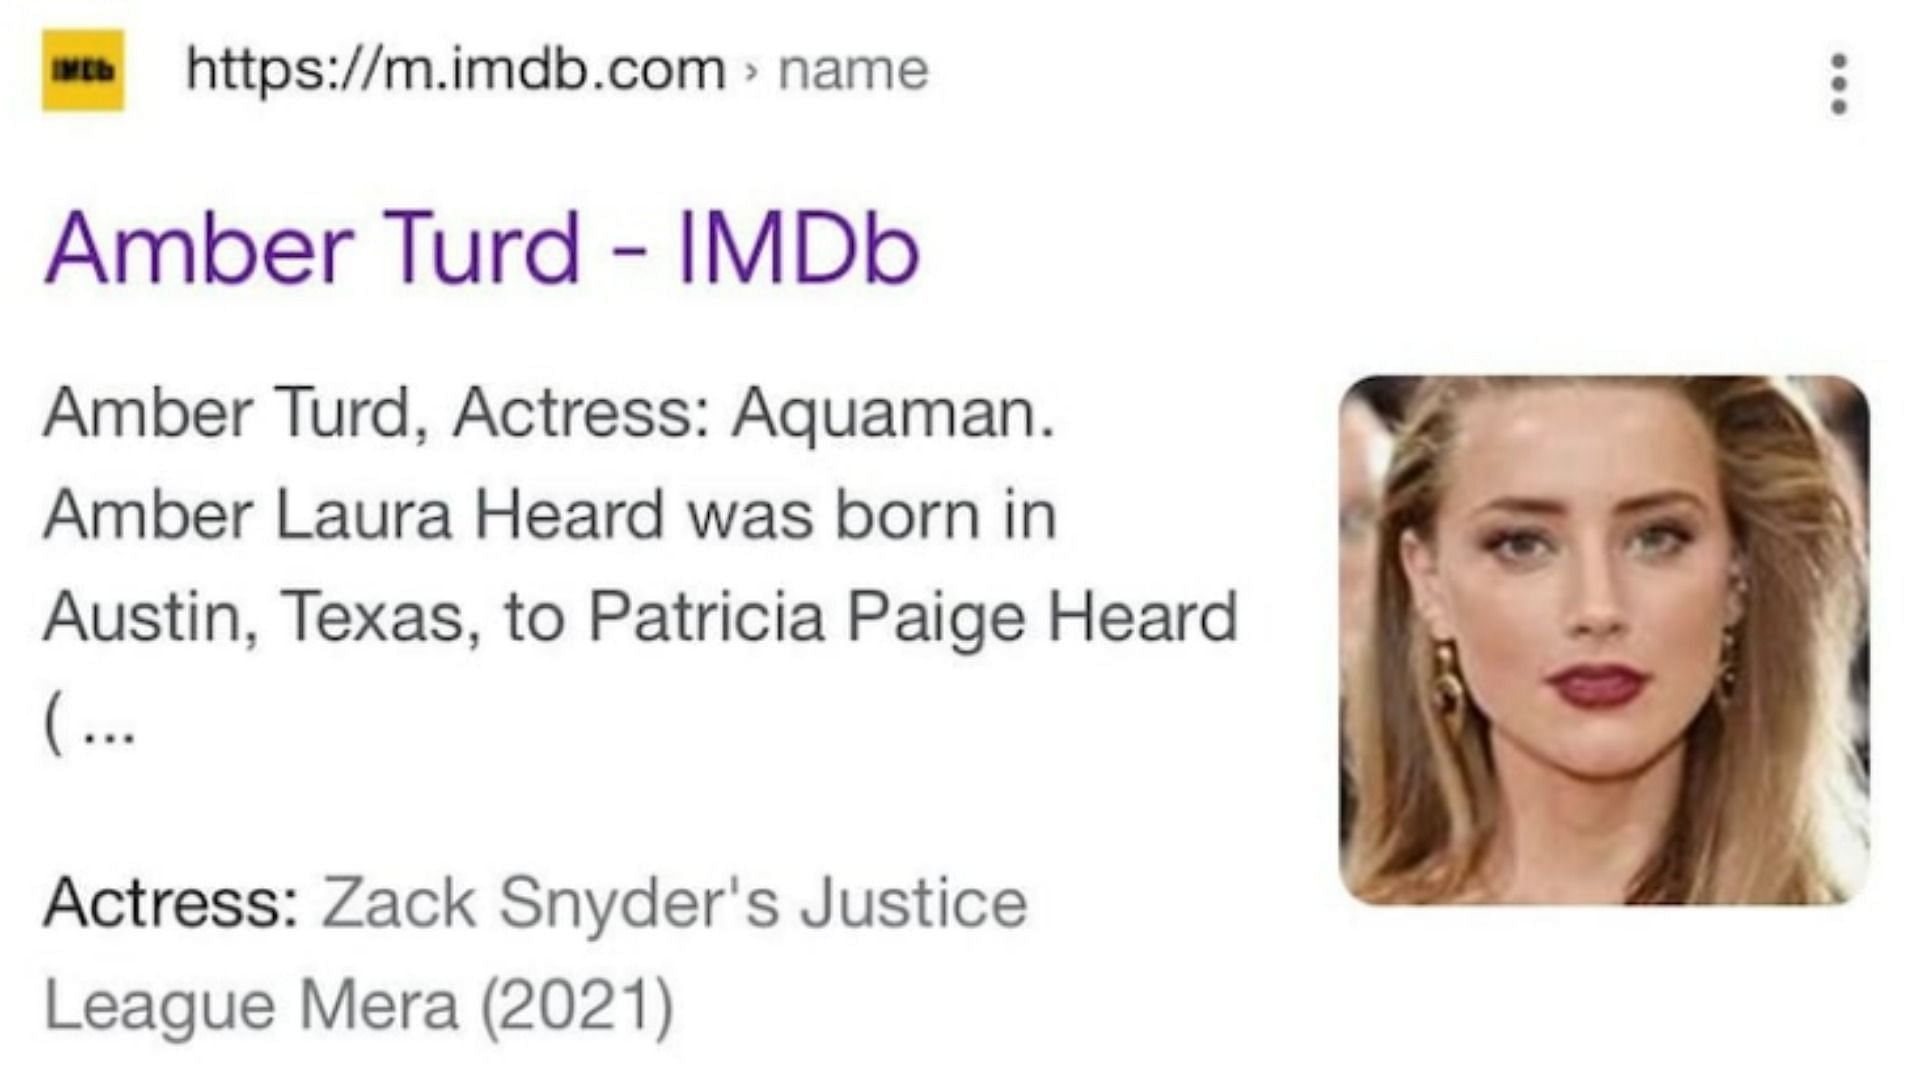 Amber Heard&#039;s name was changed on IMDb by unidentified hackers (Image via Google)